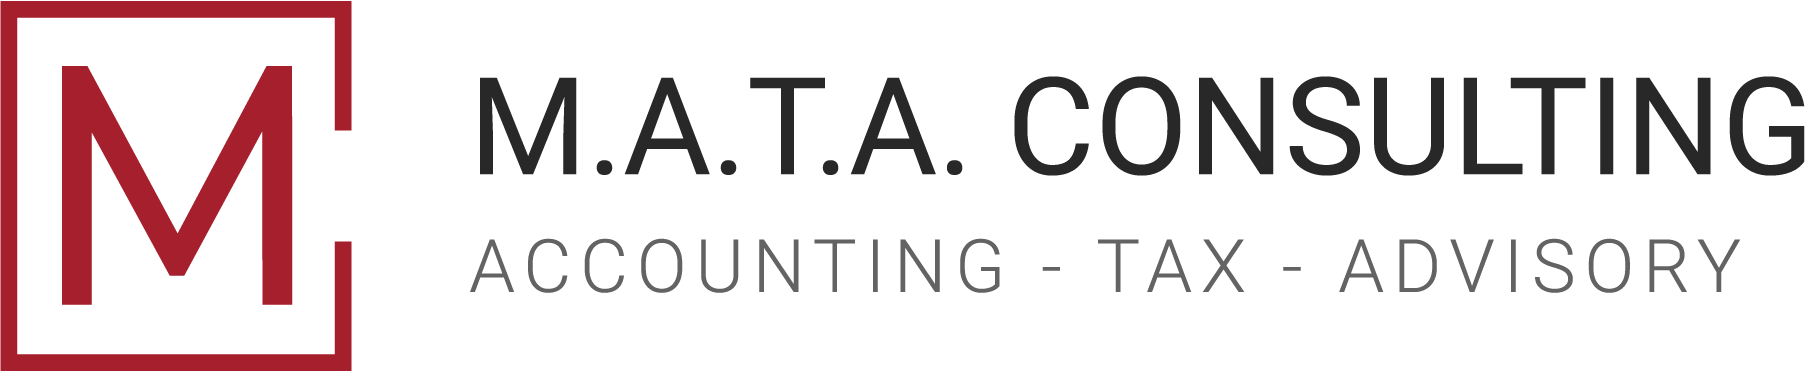 M.A.T.A Consulting